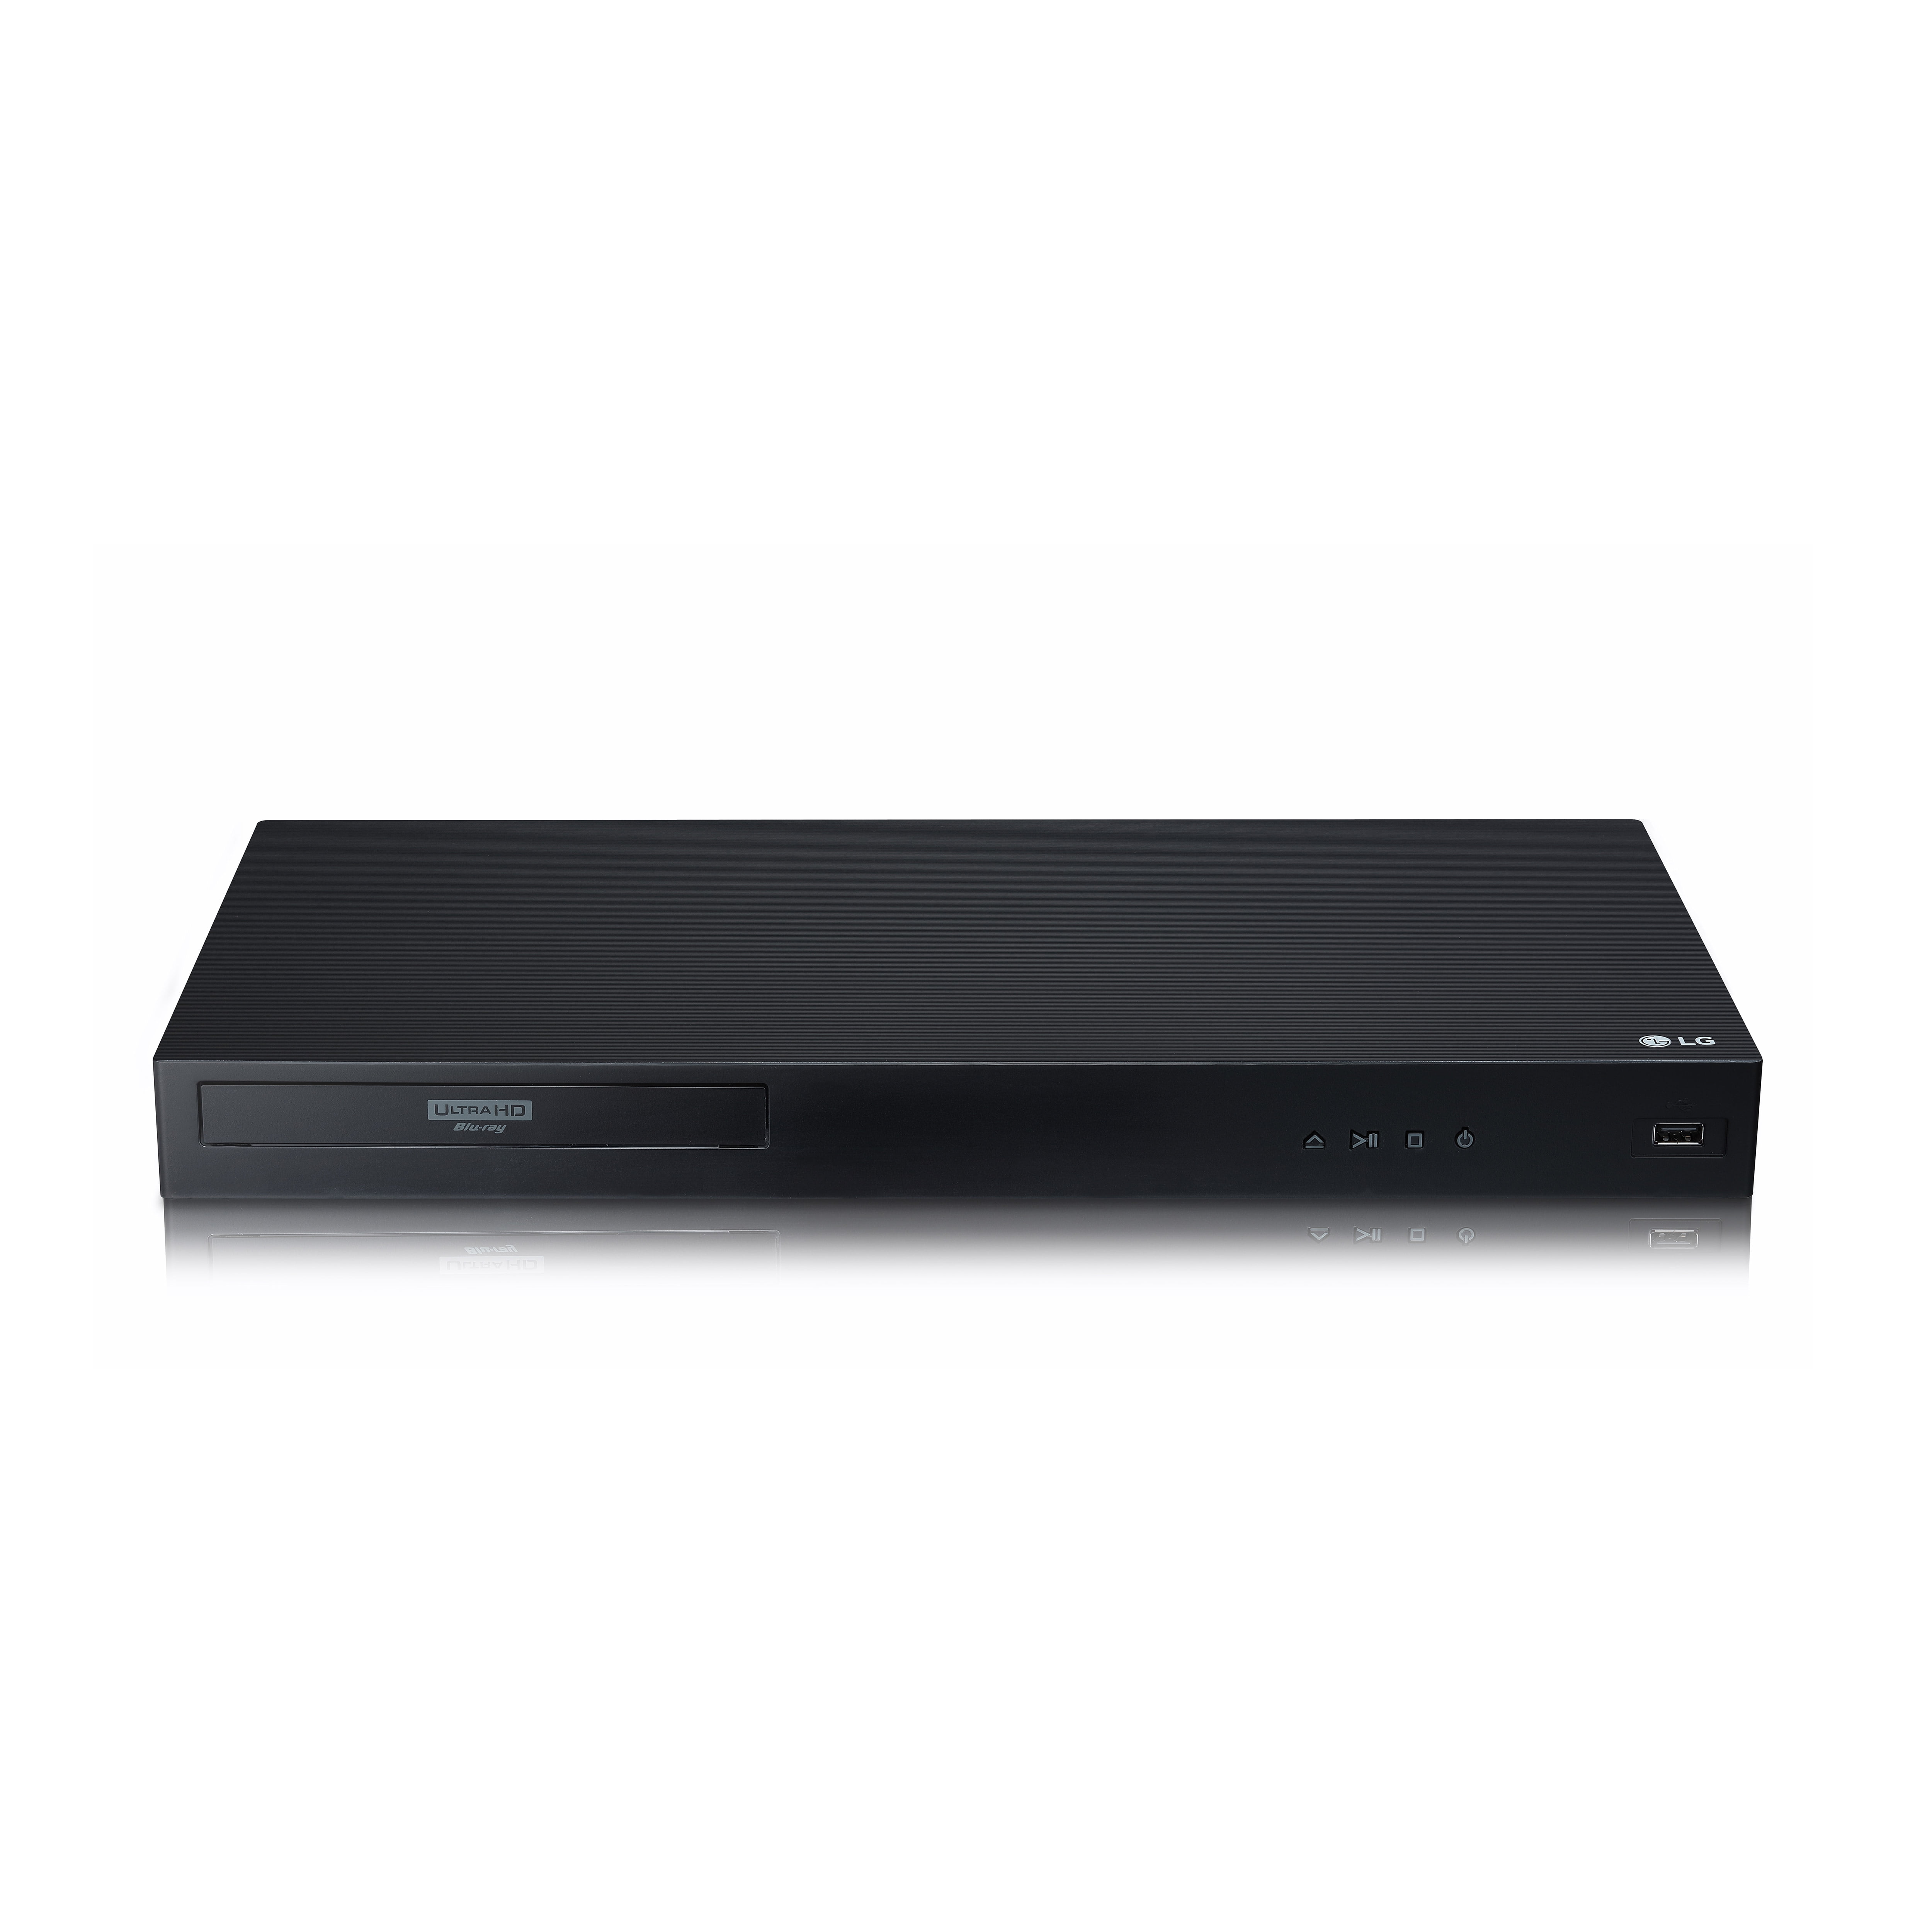 6 Best 4K Blu-ray Players for DVD [Hardware and Software]